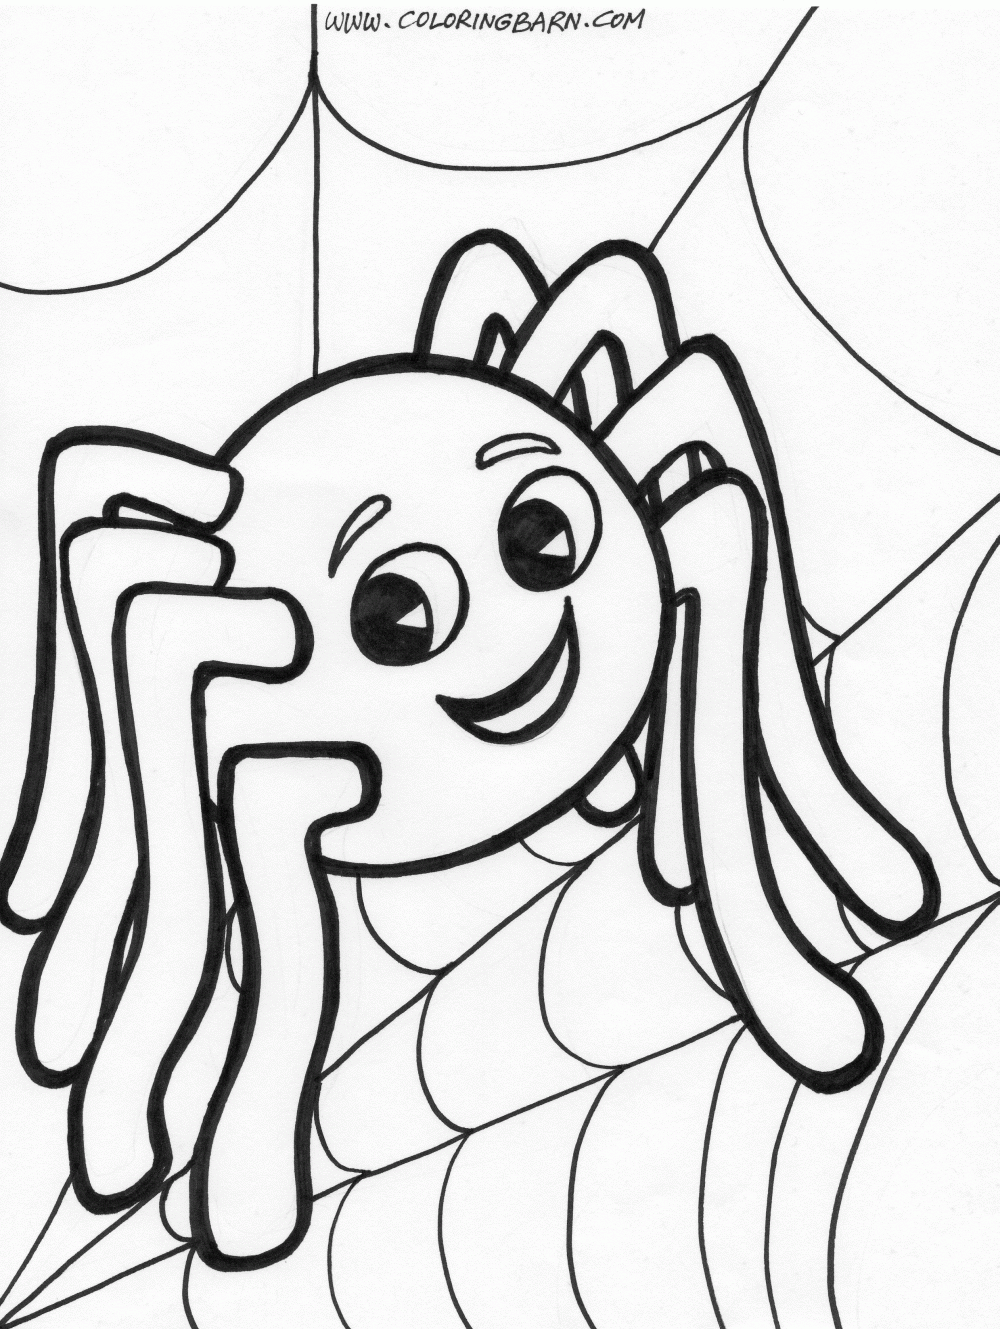 Halloween Coloring Pages (15) - Coloring Kids